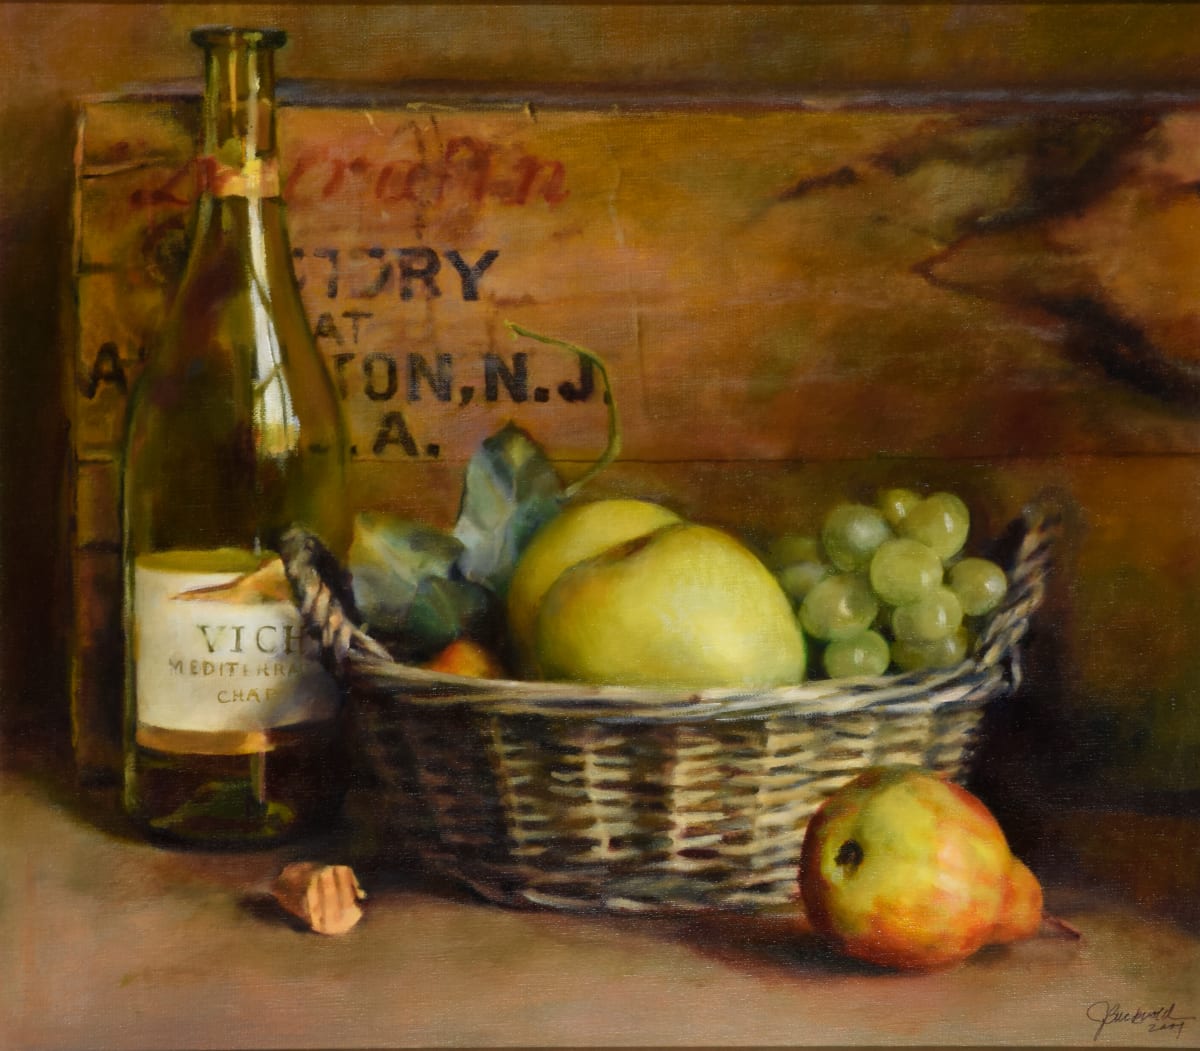 Chardonnay and Fruit by Judy Buckvold  Image: Original in Private Collection. Giclee canvas reproduction available for purchase.